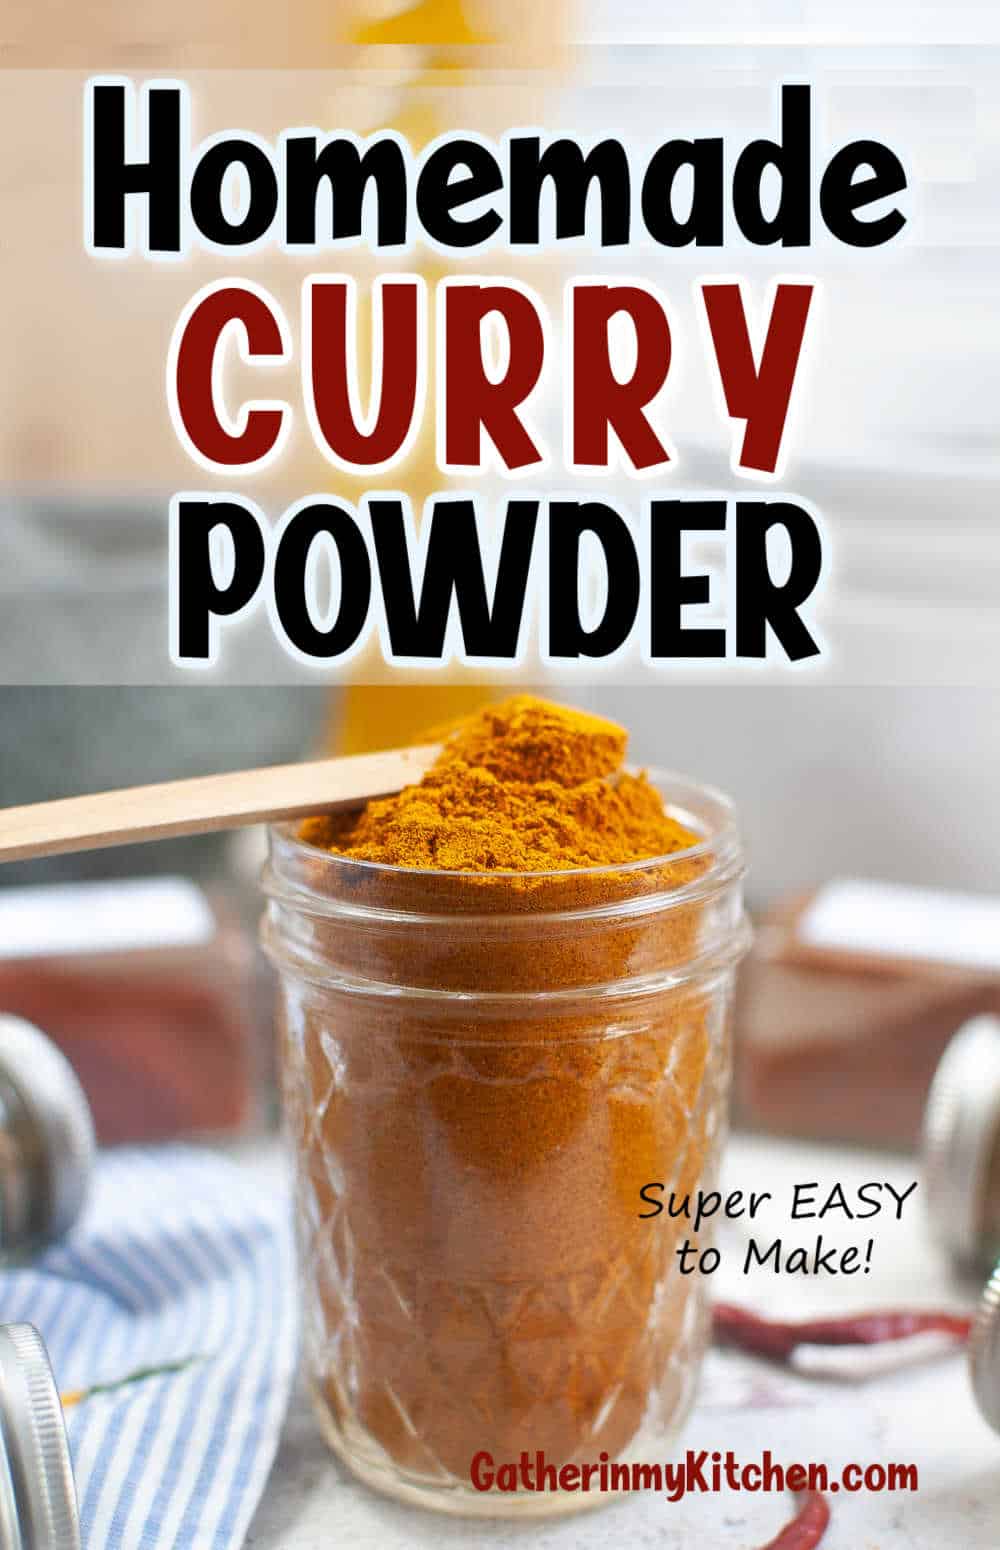 Pin image: spoon filled with curry powder above a mason jar with the words "Homemade Curry Powder" above.